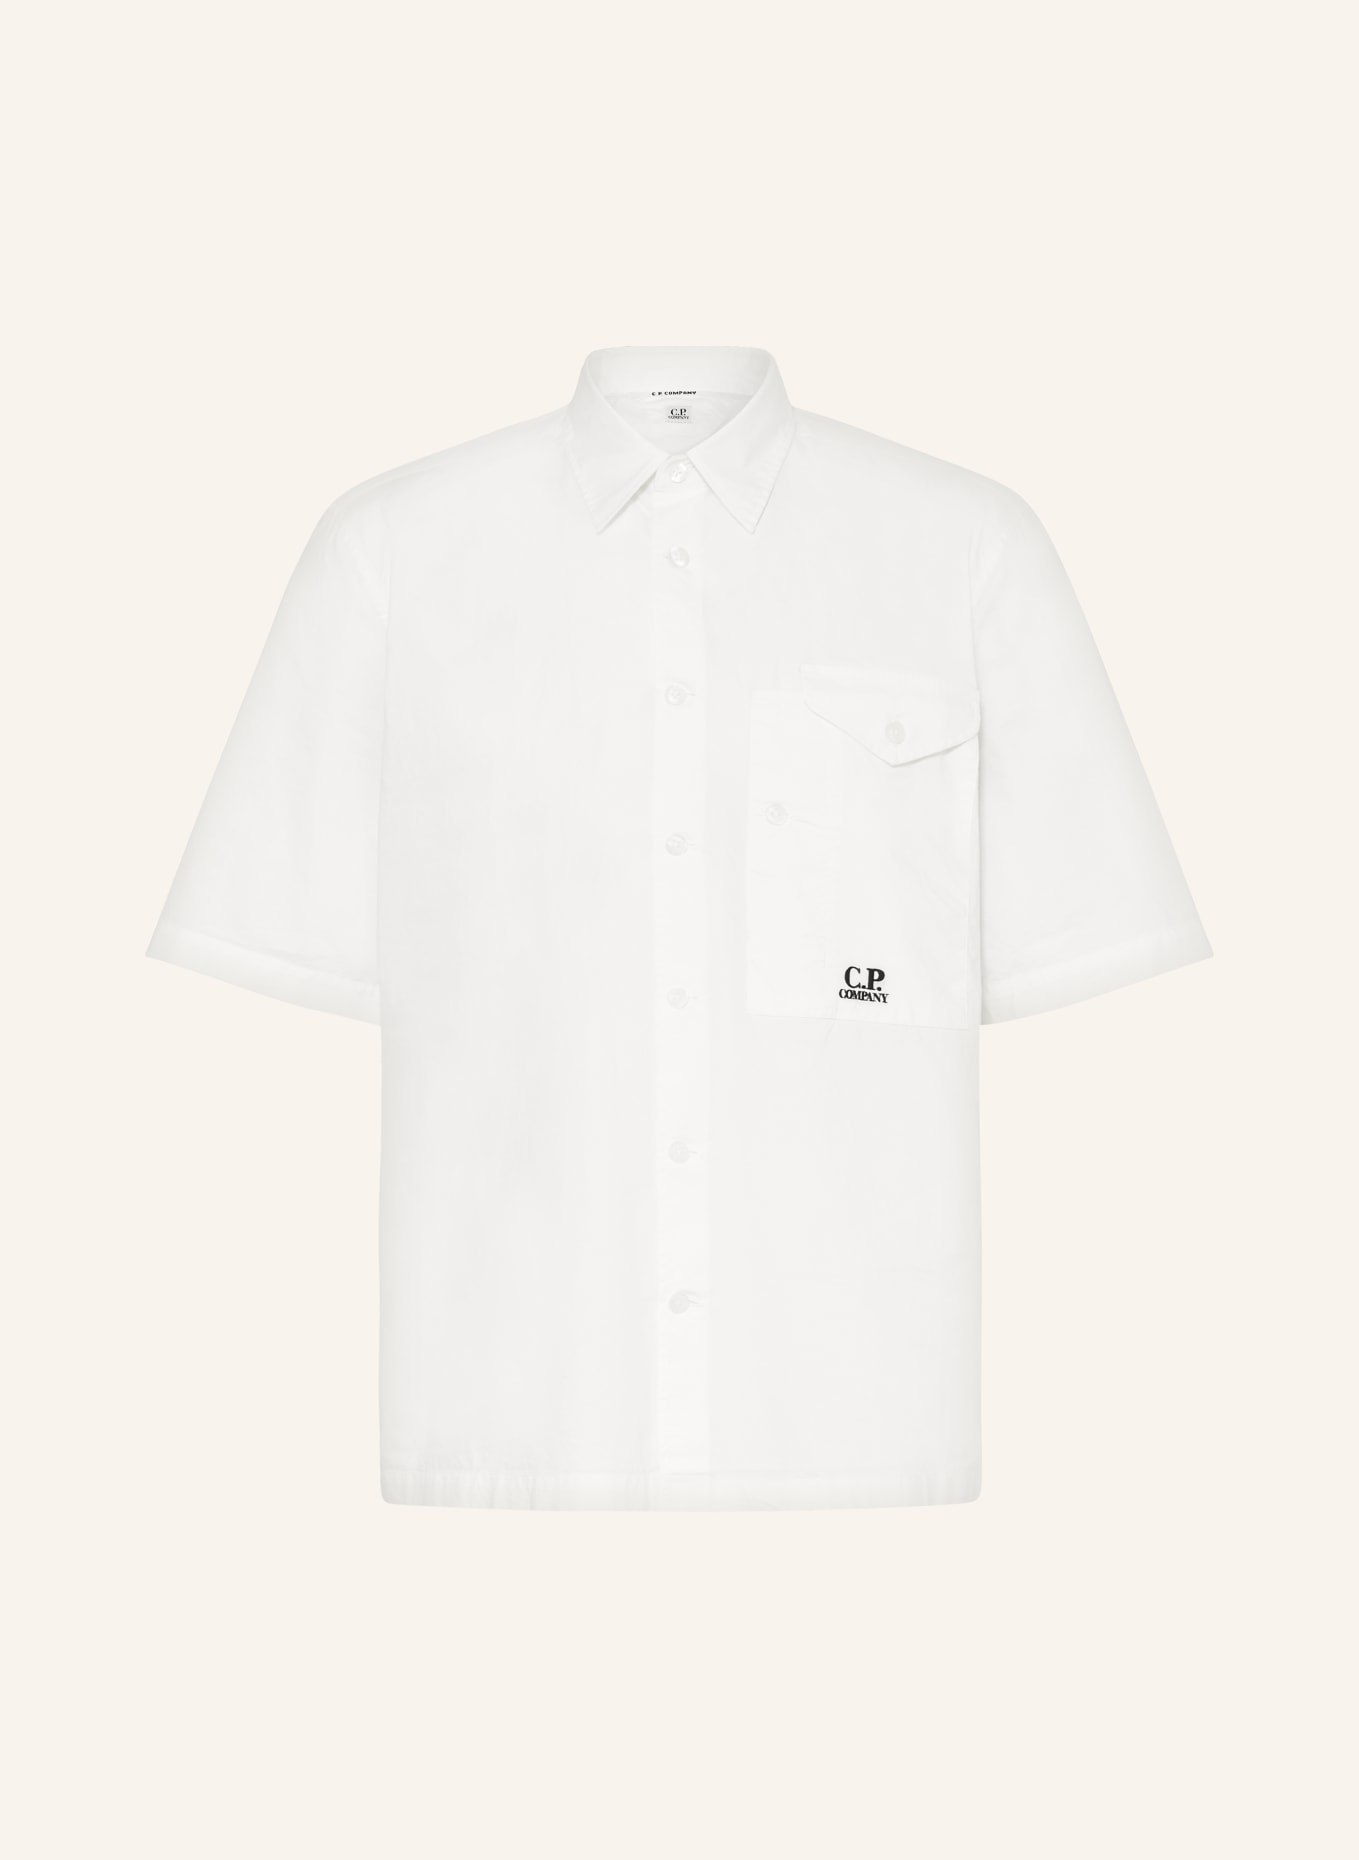 C.P. COMPANY Short sleeve shirt comfort fit, Color: WHITE (Image 1)